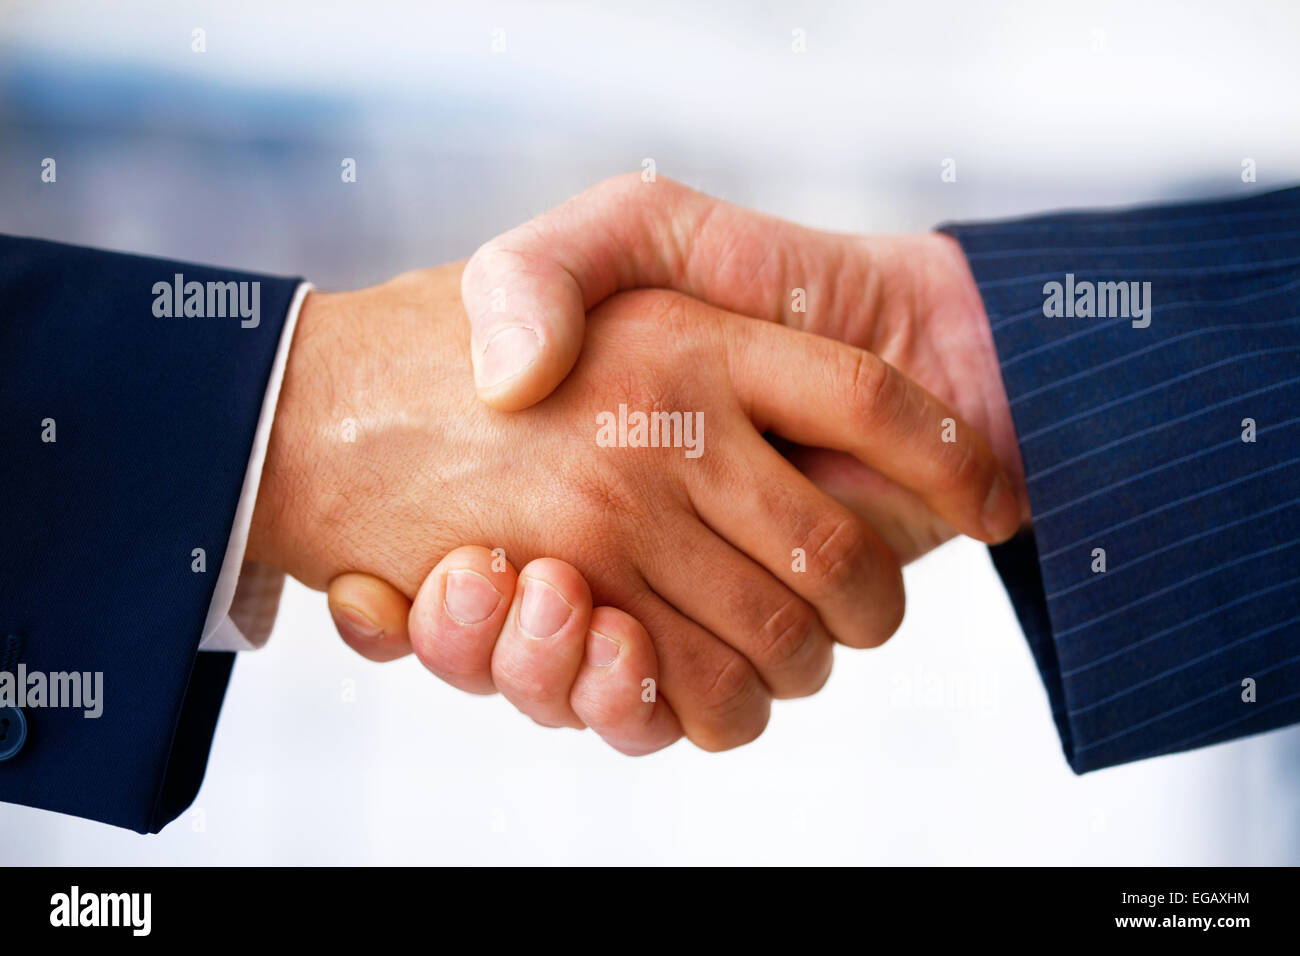 Closeup picture of businesspeople shaking hands, making an agreement. Stock Photo